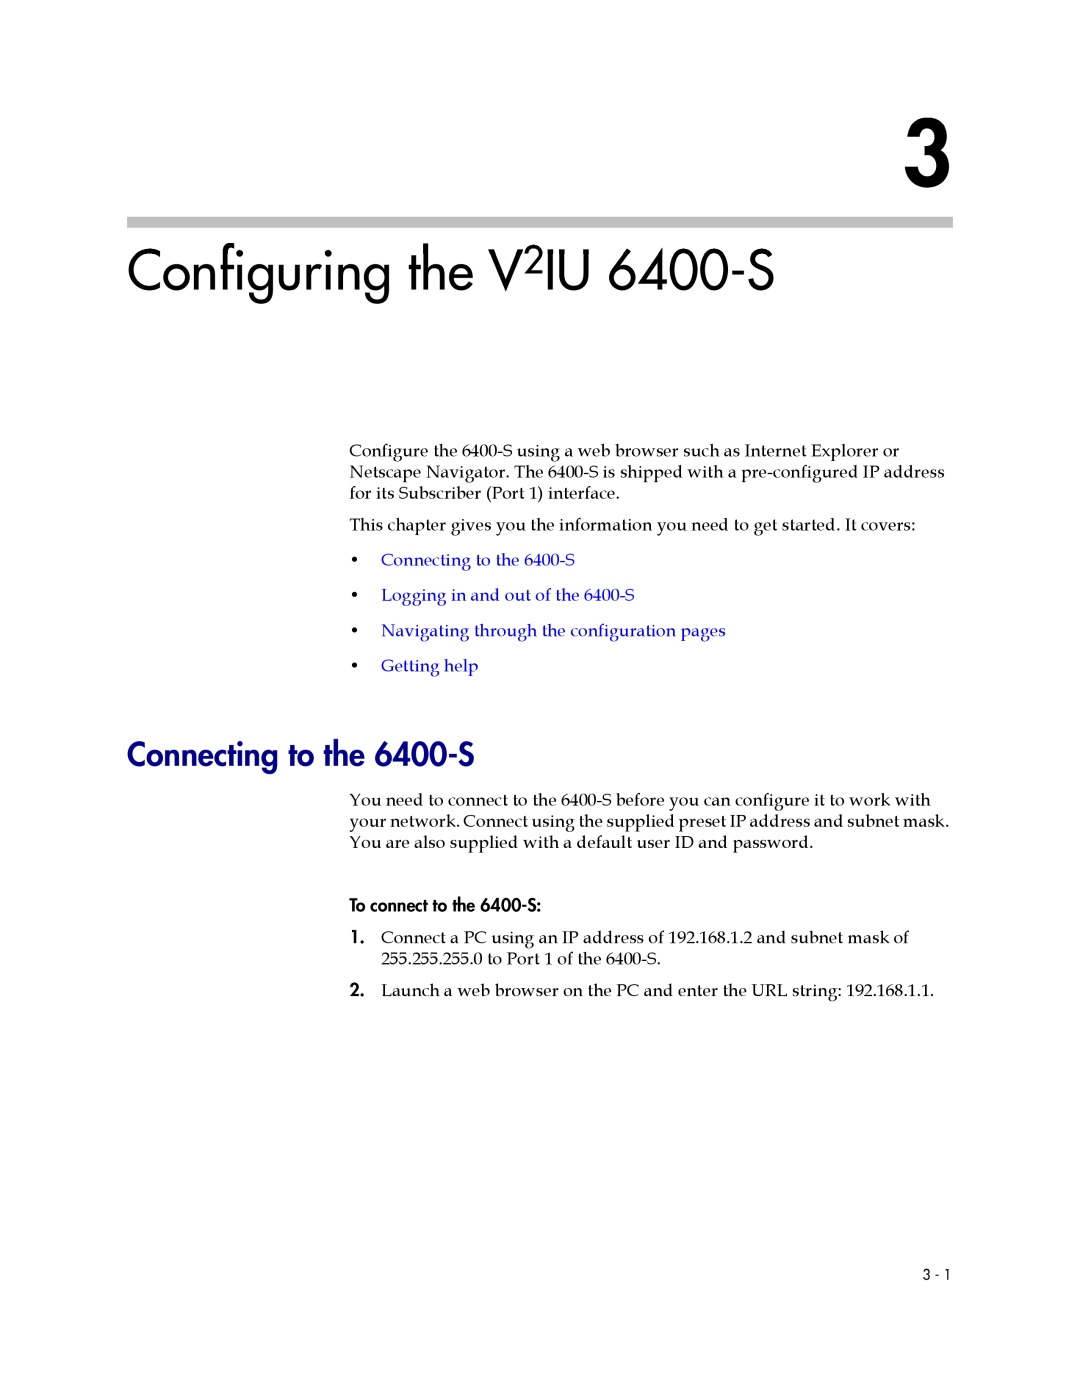 Polycom Configuring the V2IU 6400-S, Connecting to the 6400-S, Navigating through the configuration pages Getting help 